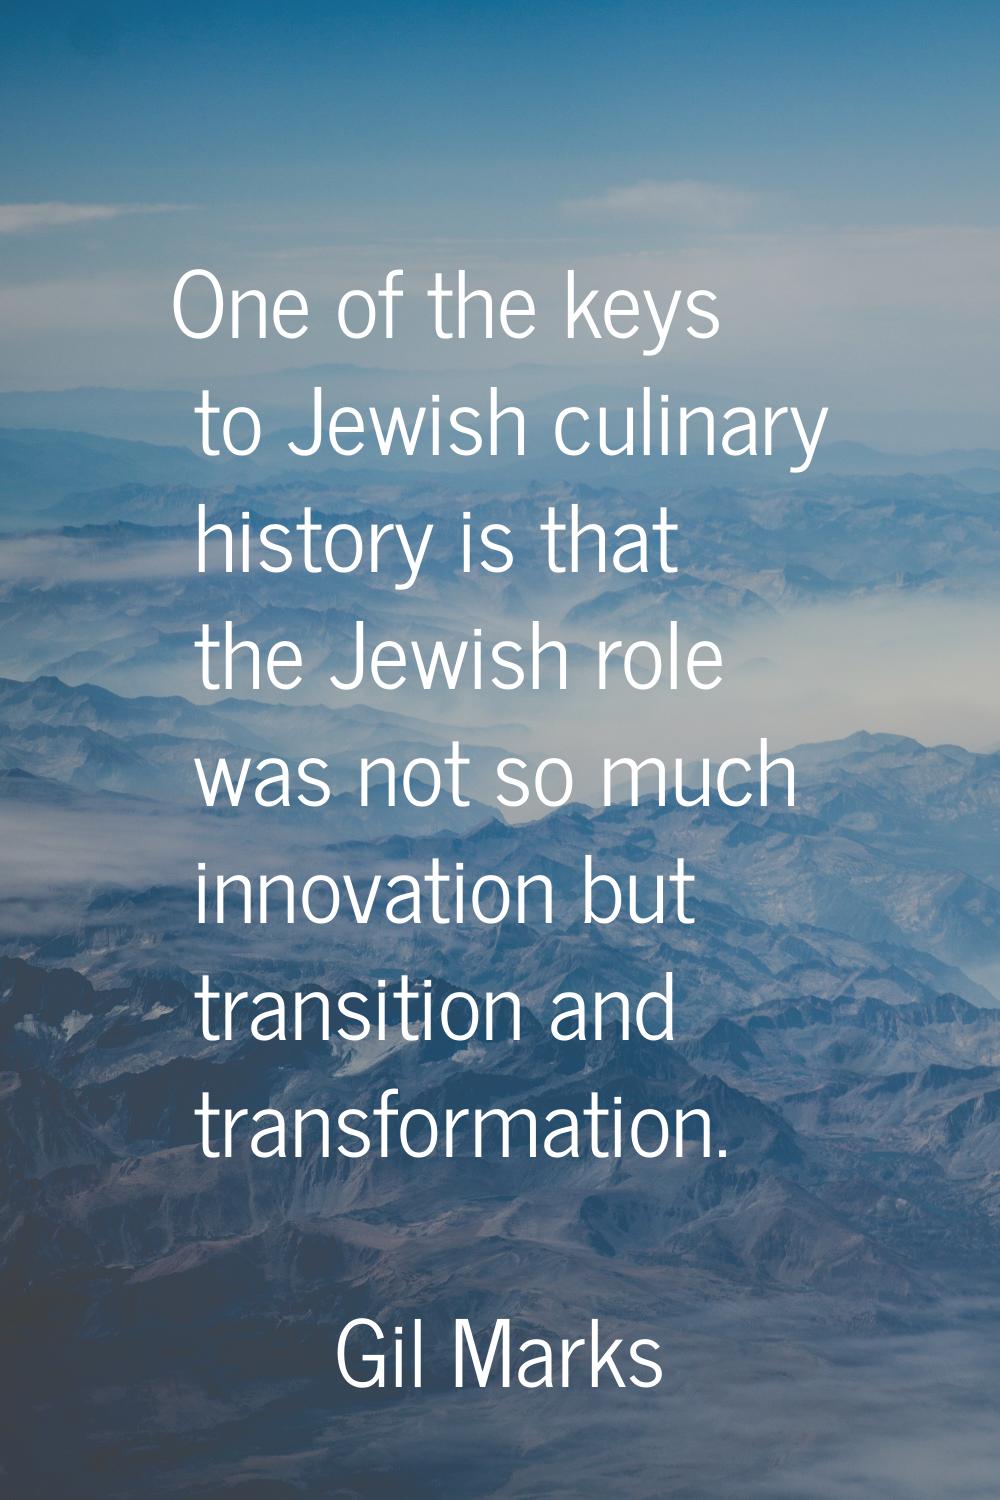 One of the keys to Jewish culinary history is that the Jewish role was not so much innovation but t